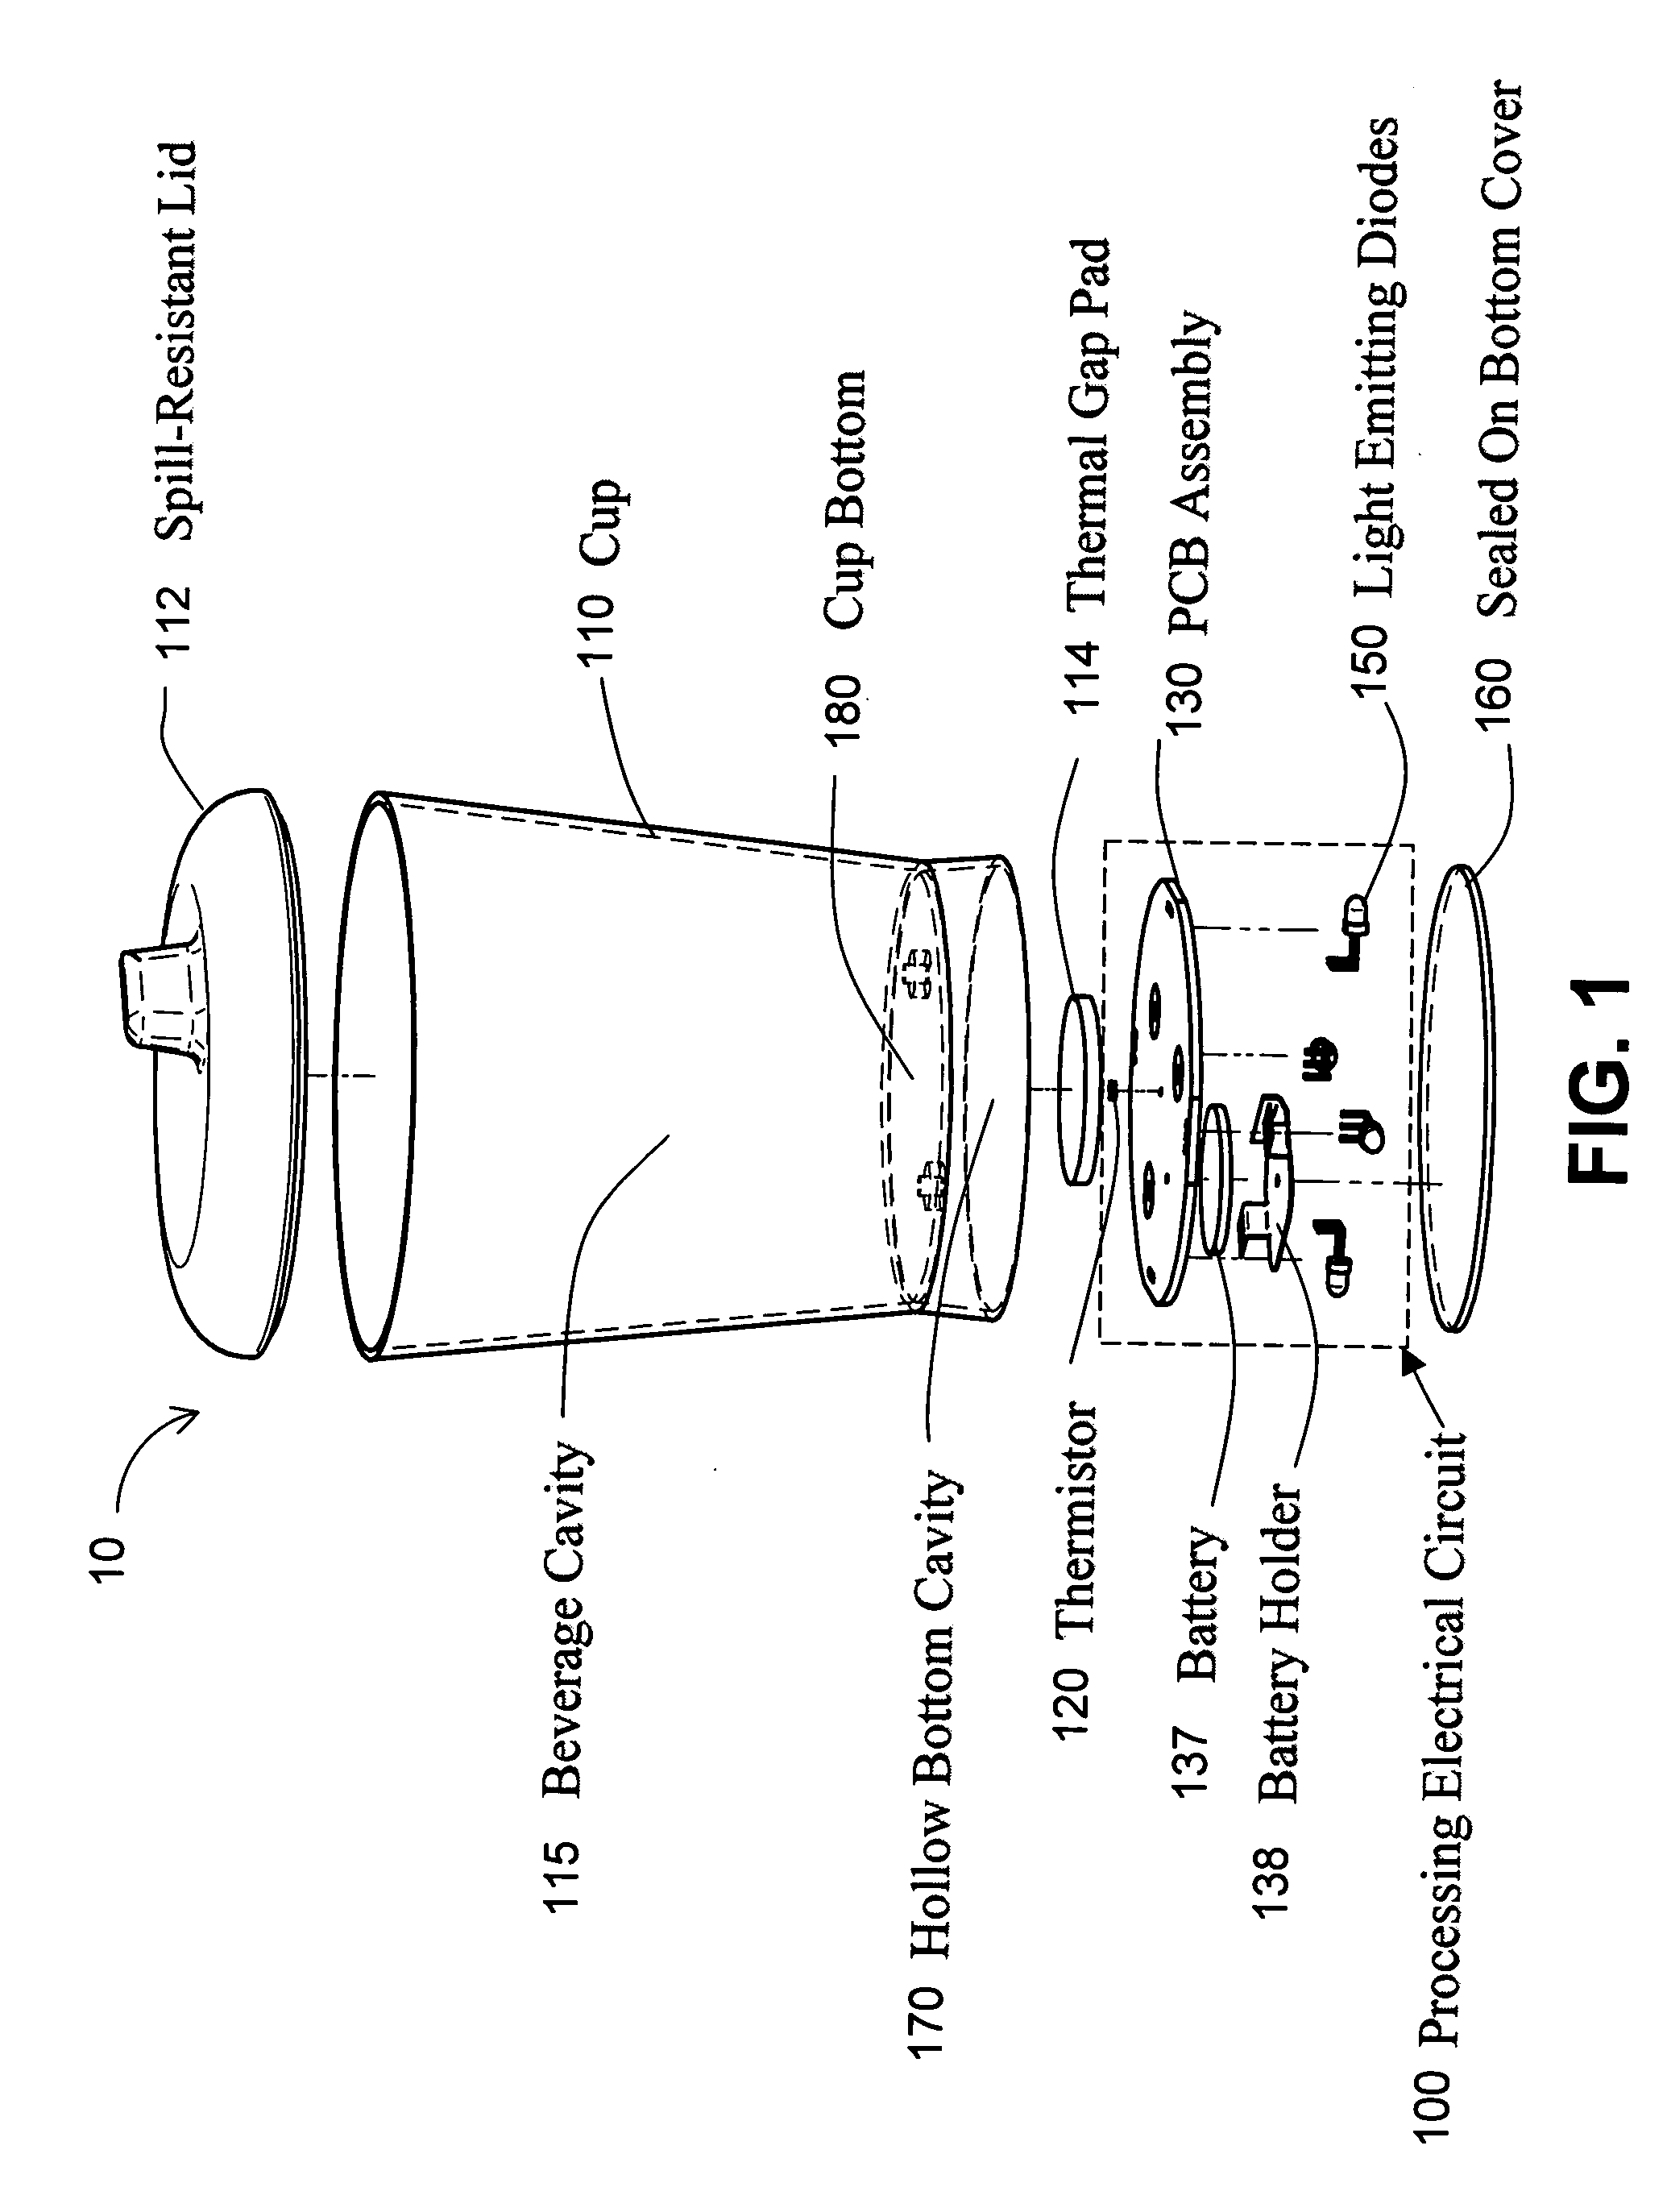 Spill-resistant beverage container with detection and notification indicator